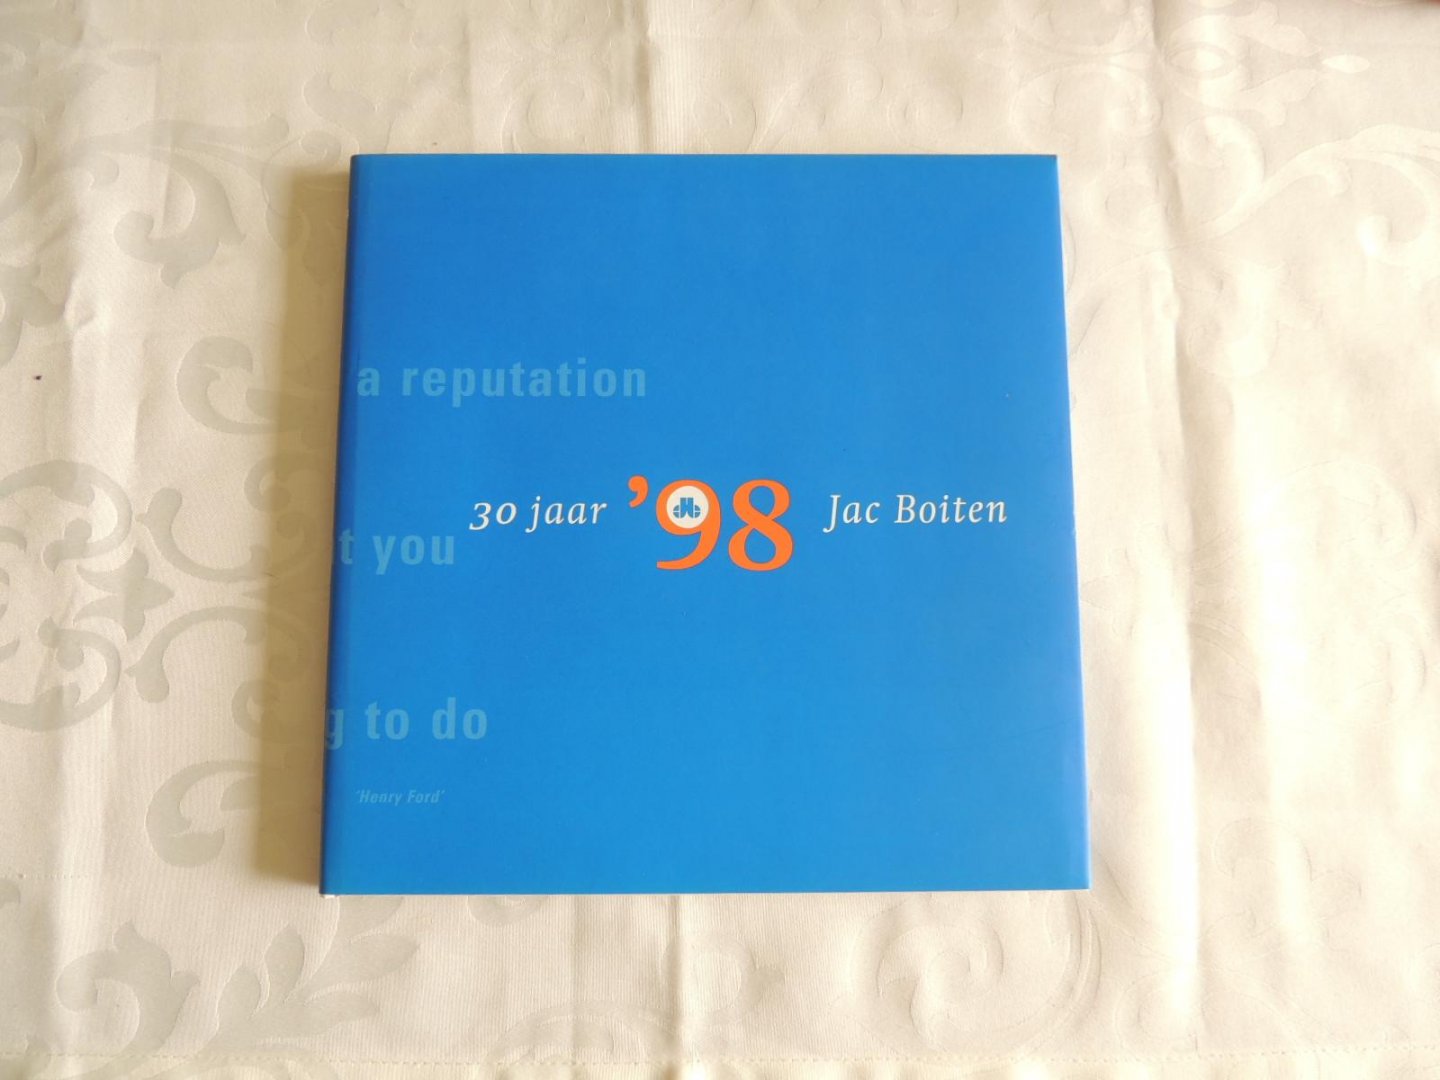 Hiemstra - kemper - 30 Jaar '98 Jac Boiten - you can't build a reputation on what you are going to do - 1968 - 1998.